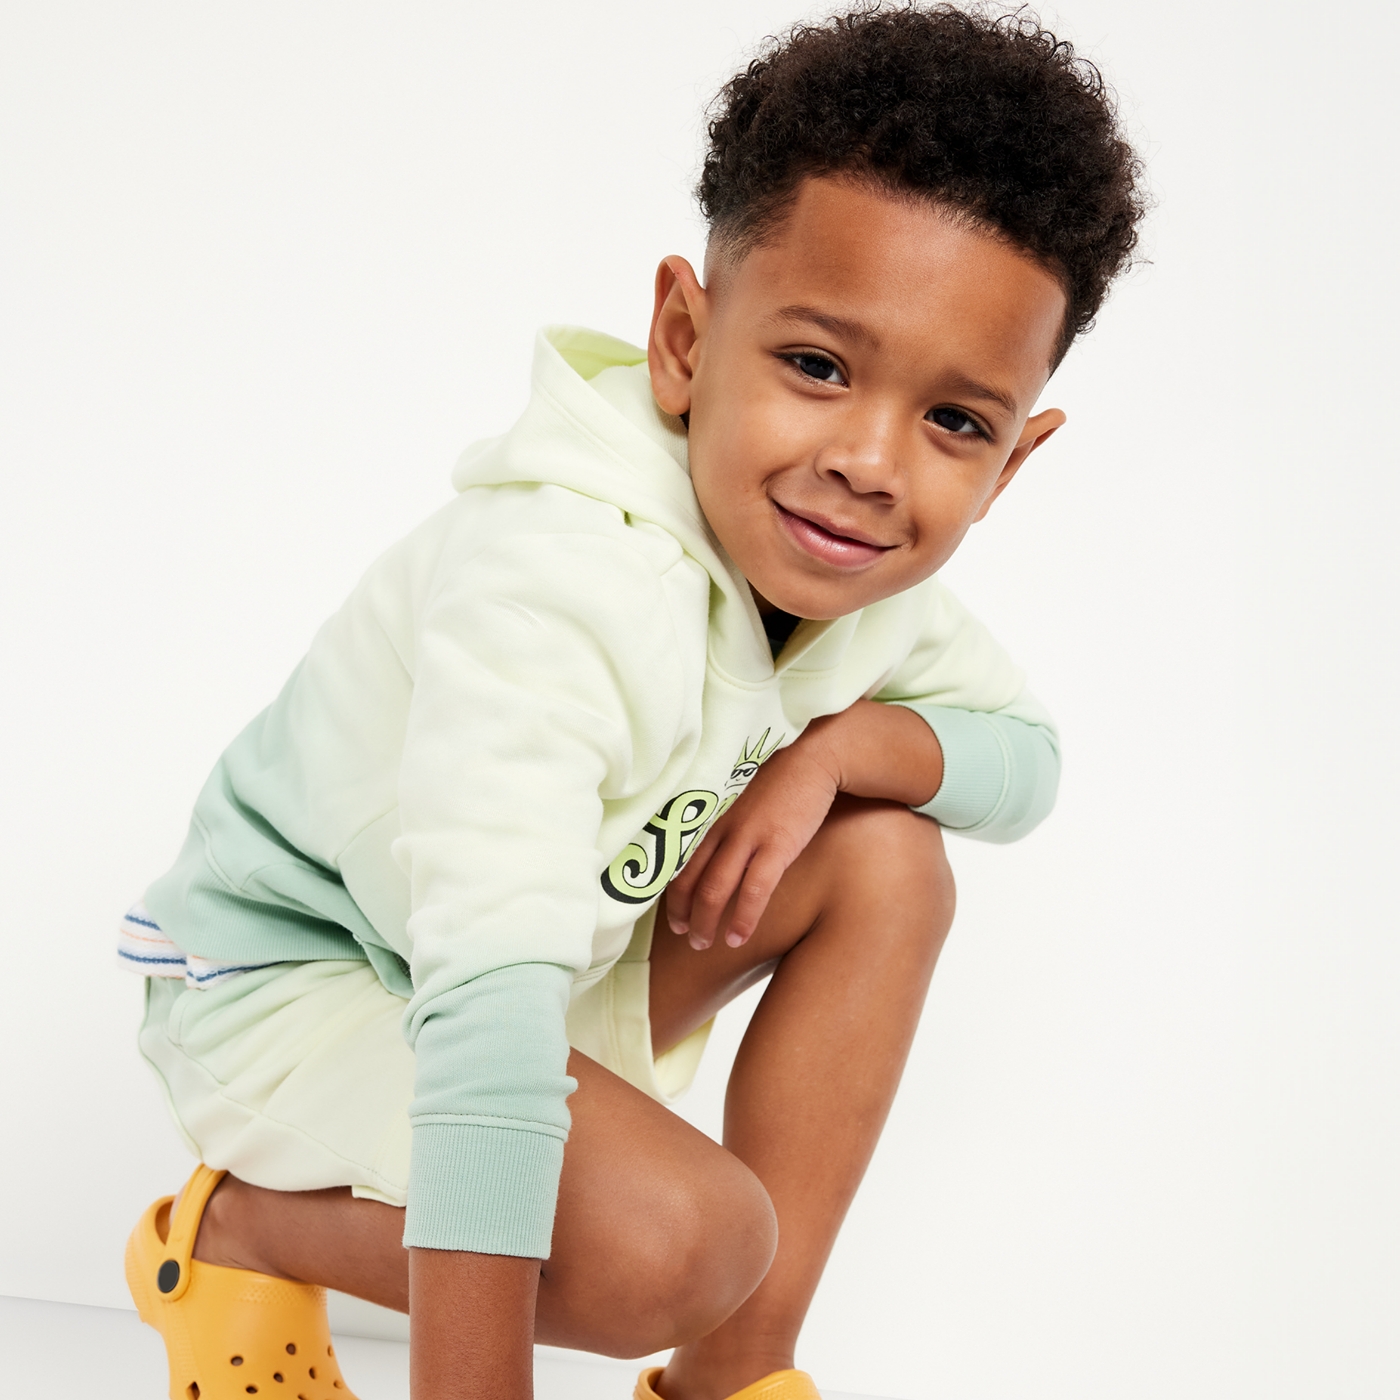 A toddler boy dressed head to toe in fleece sweatshirt and shorts.